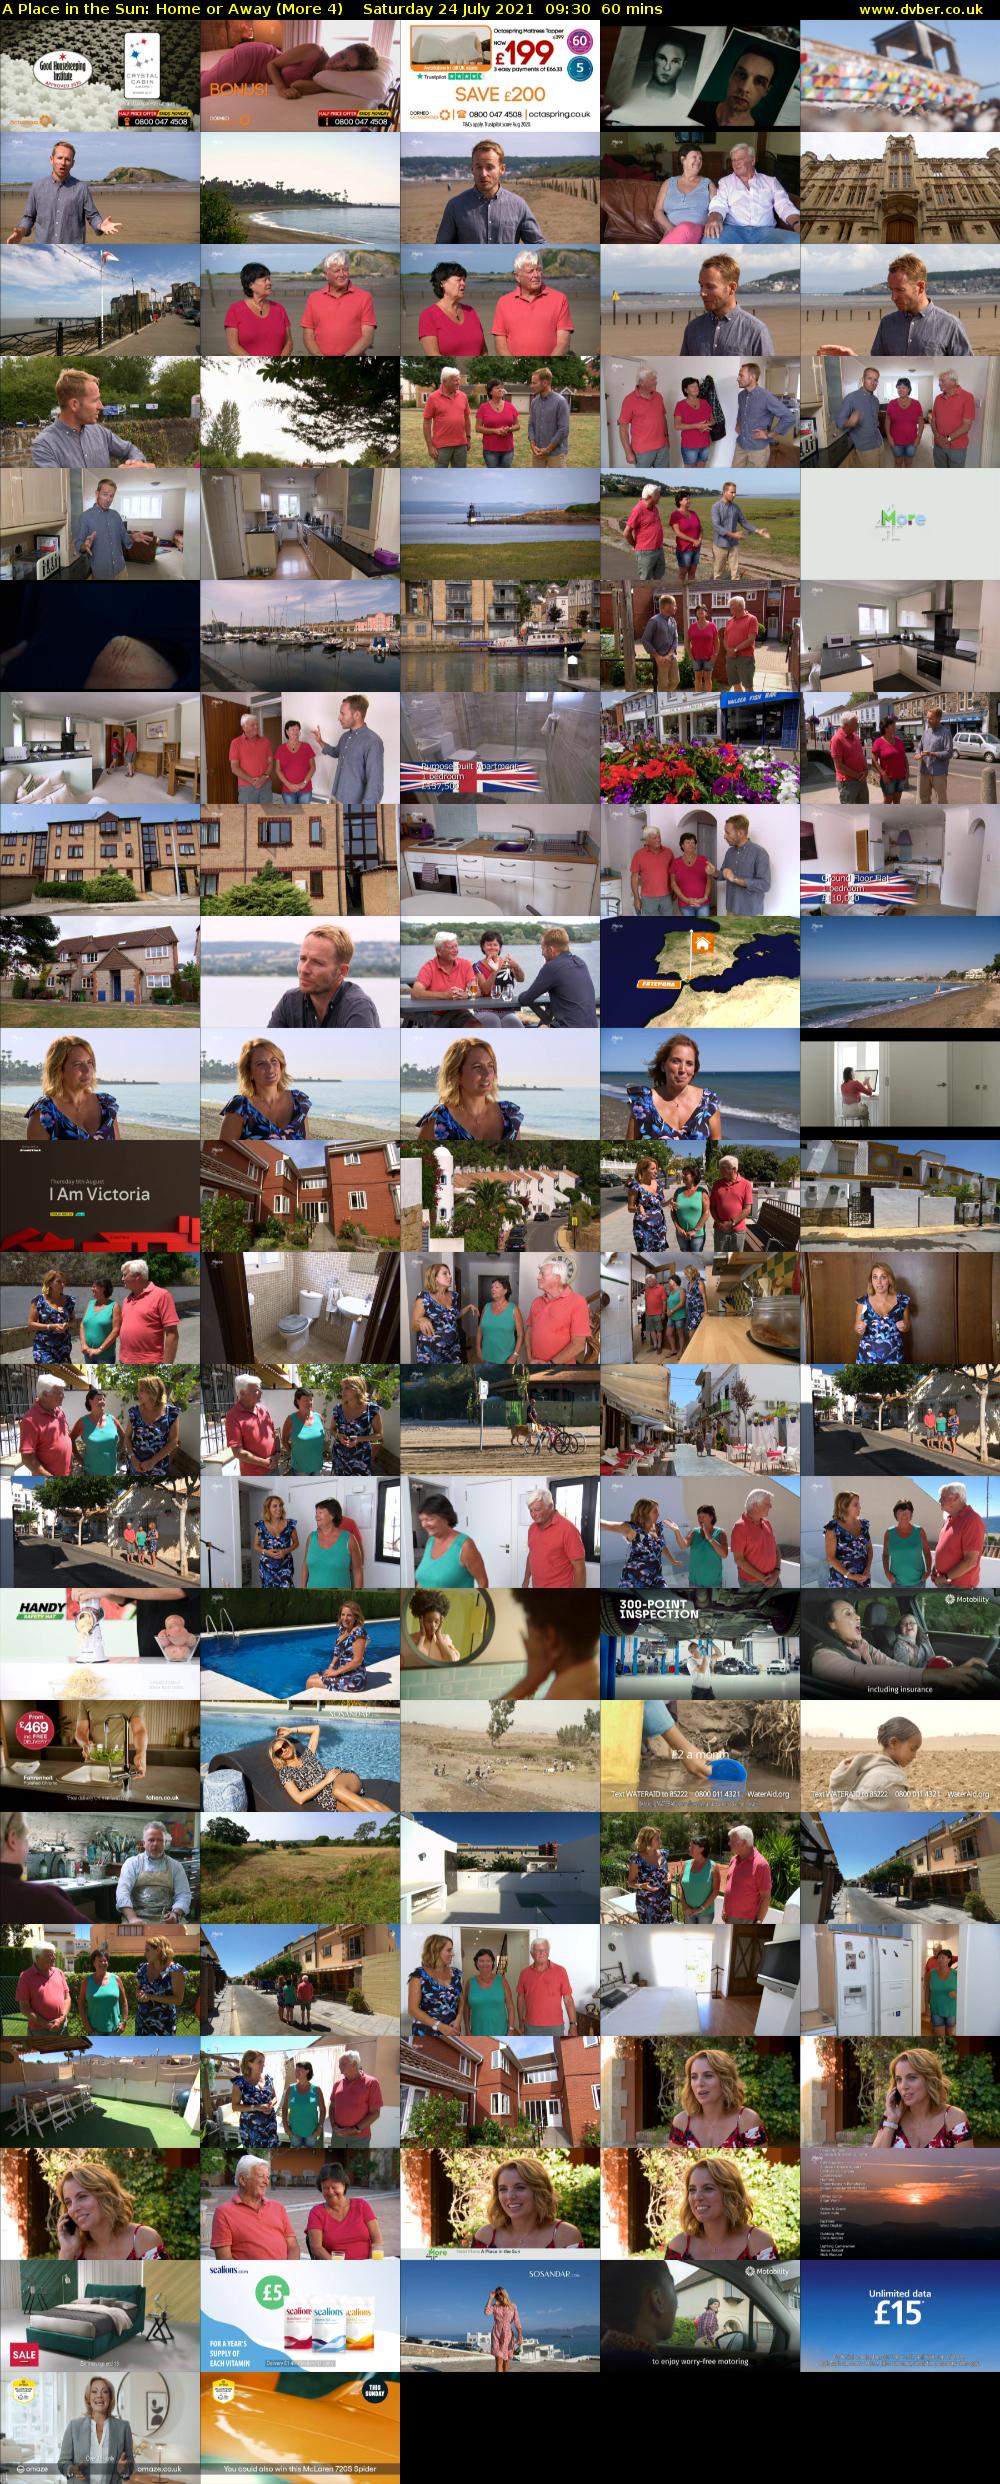 A Place in the Sun: Home or Away (More 4) Saturday 24 July 2021 09:30 - 10:30